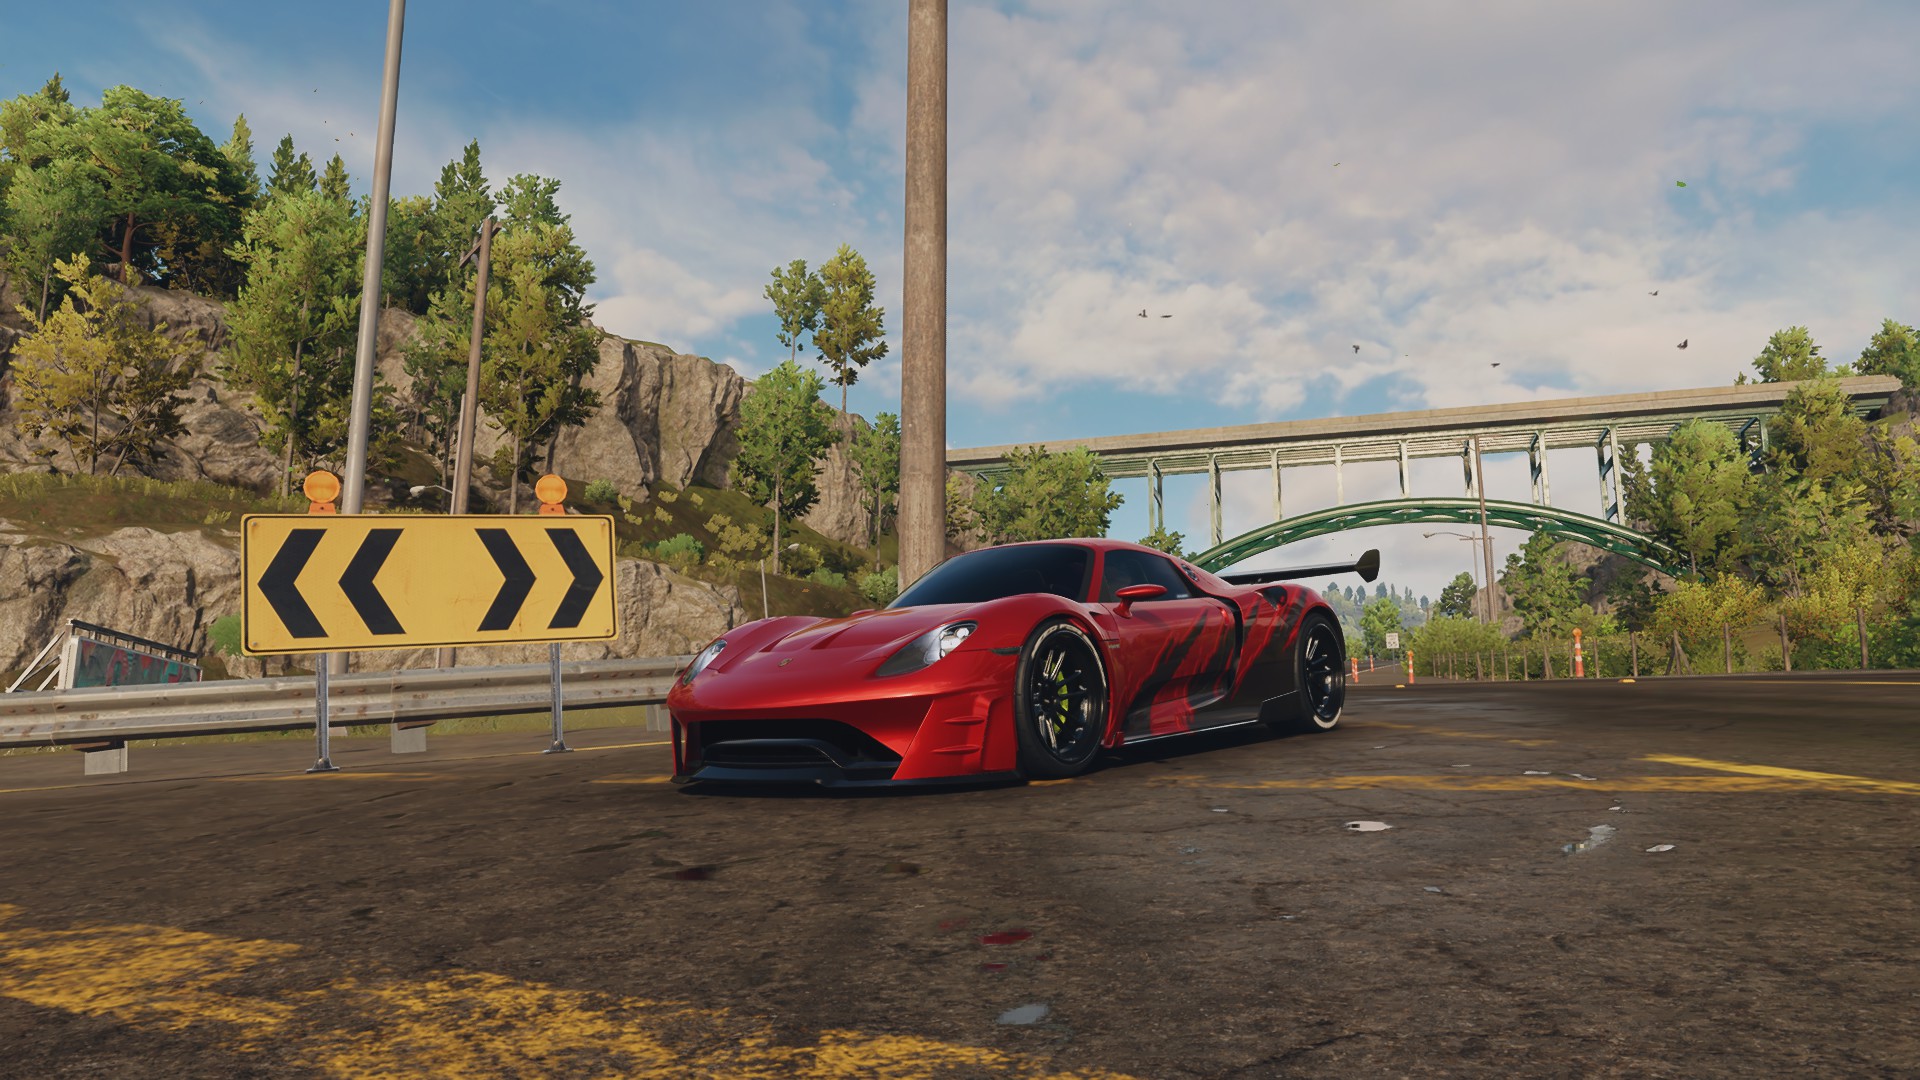 General 1920x1080 video games Need for speed Unbound car road bridge clouds sky screen shot Porsche 918 Spyder frontal view CGI trees